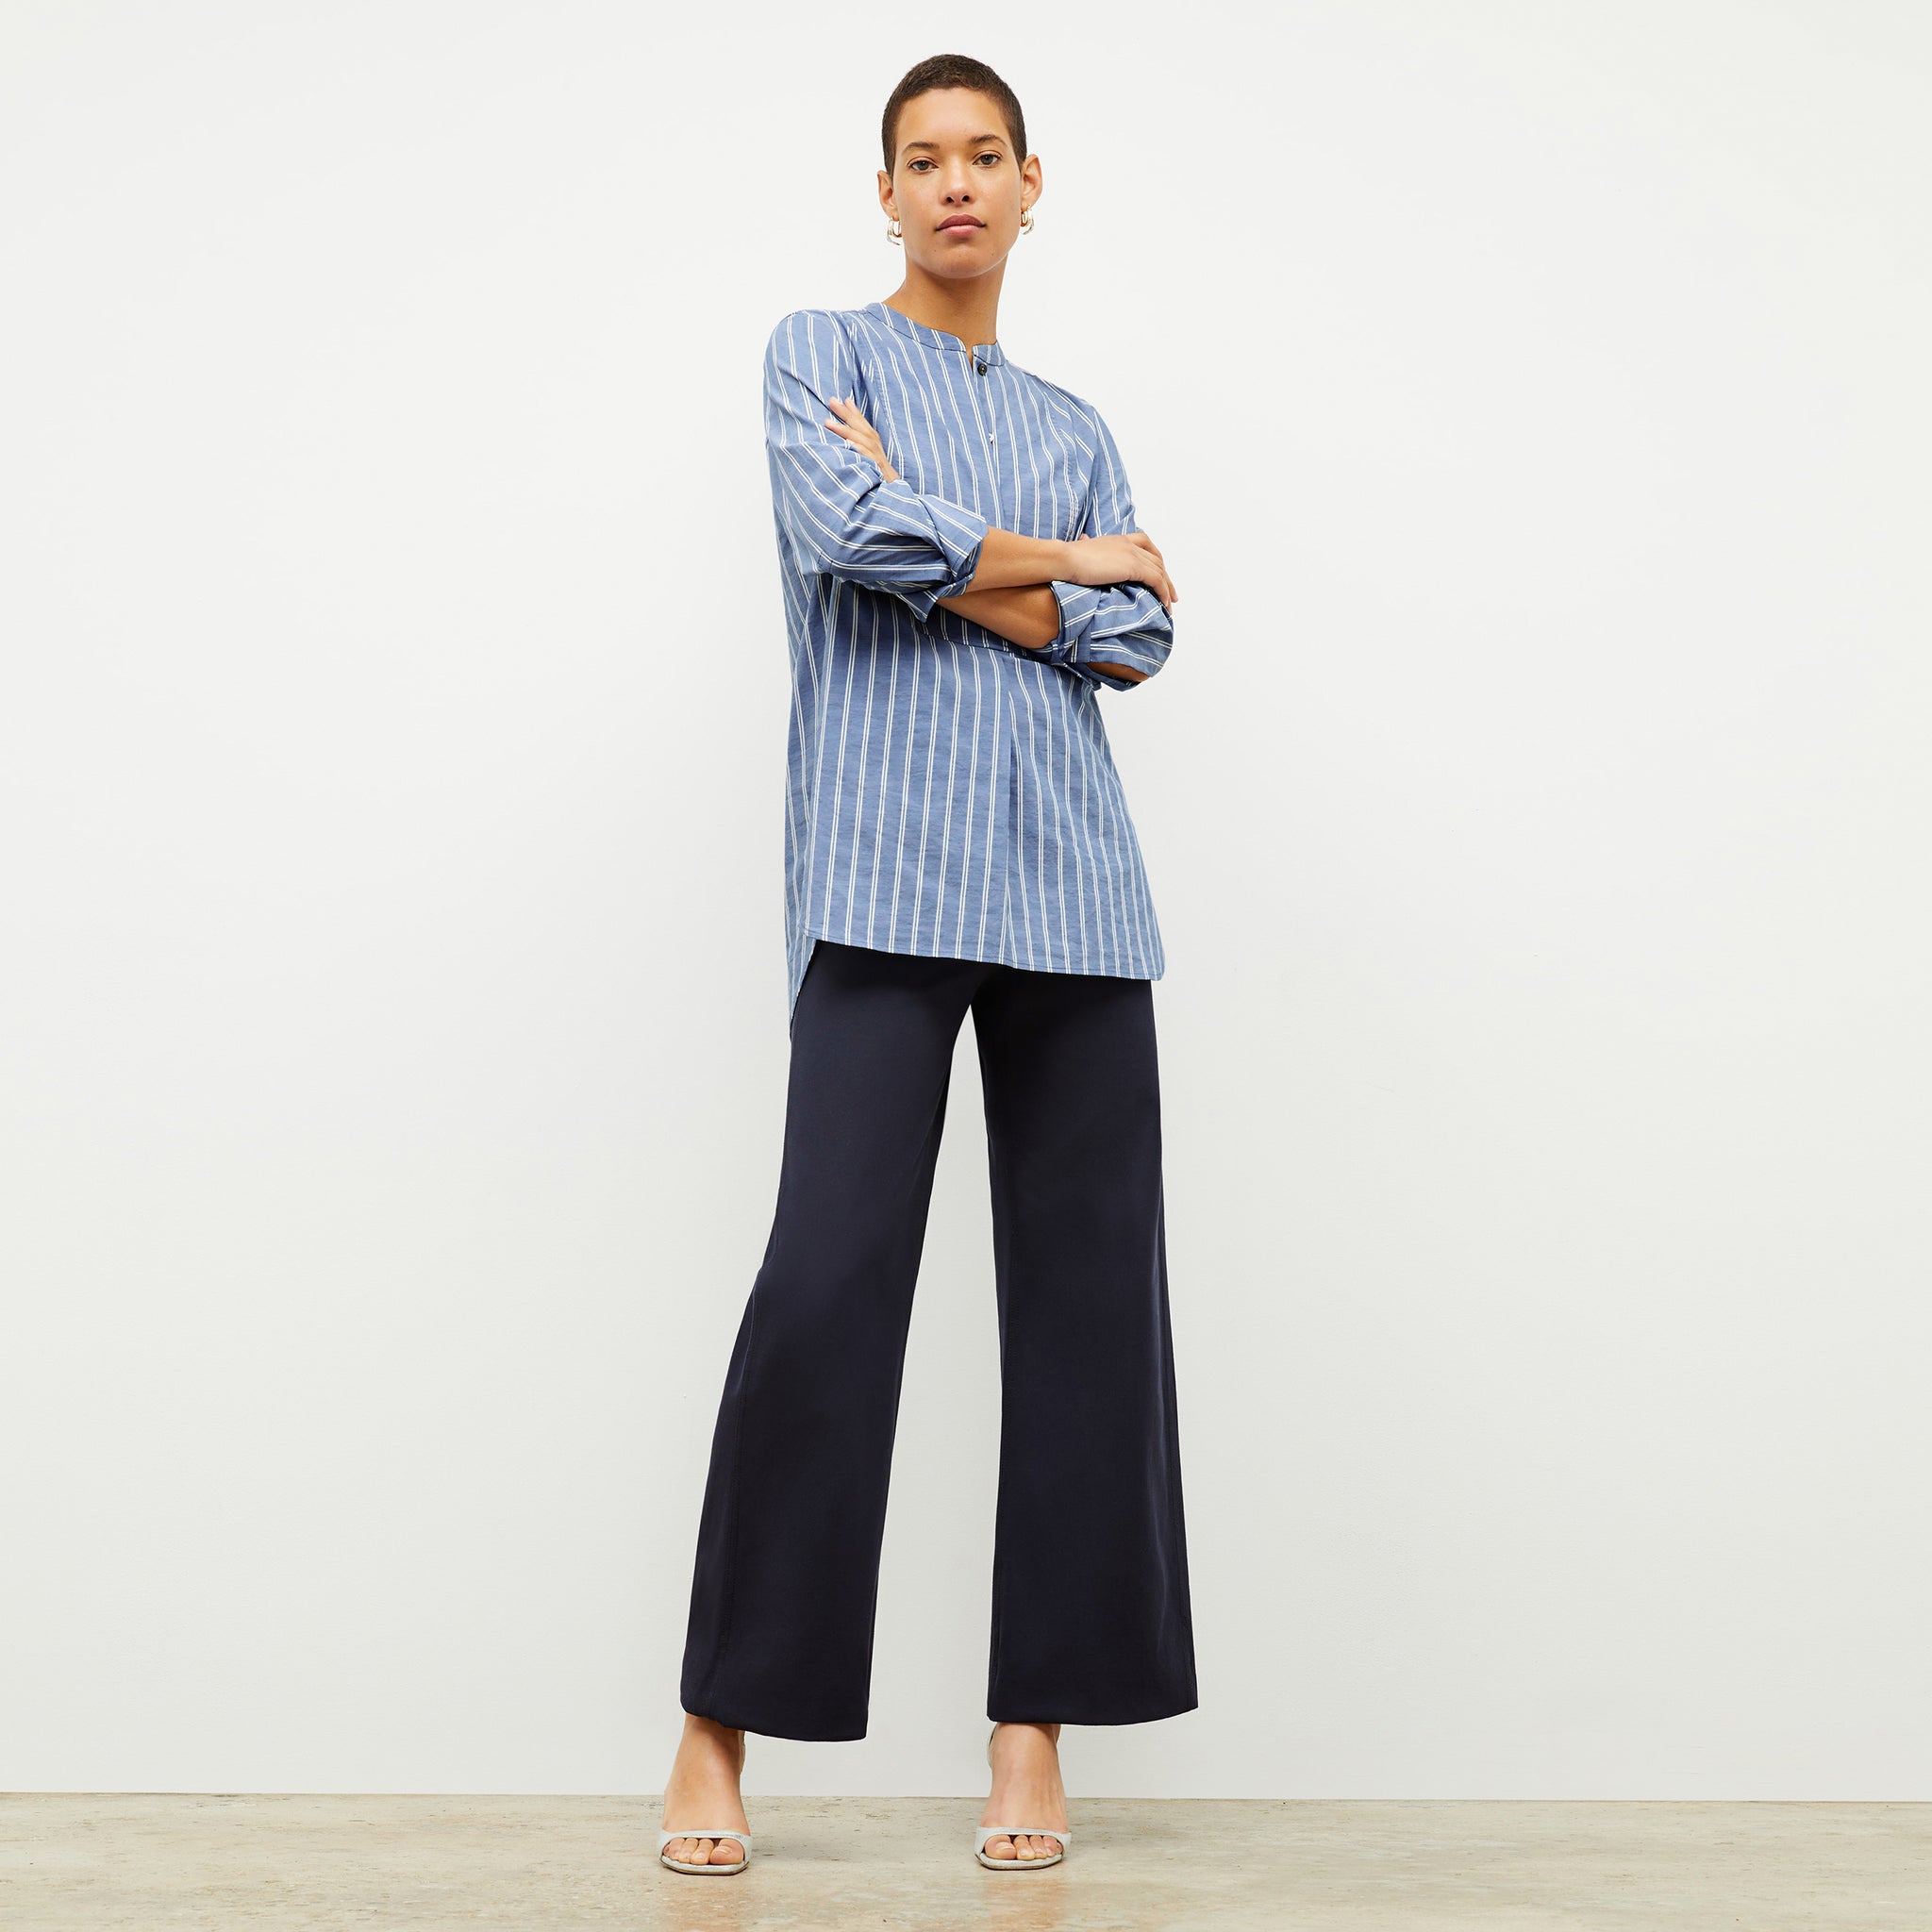 front image of a woman wearing the Nichols shirt in blue and white poplin stripe